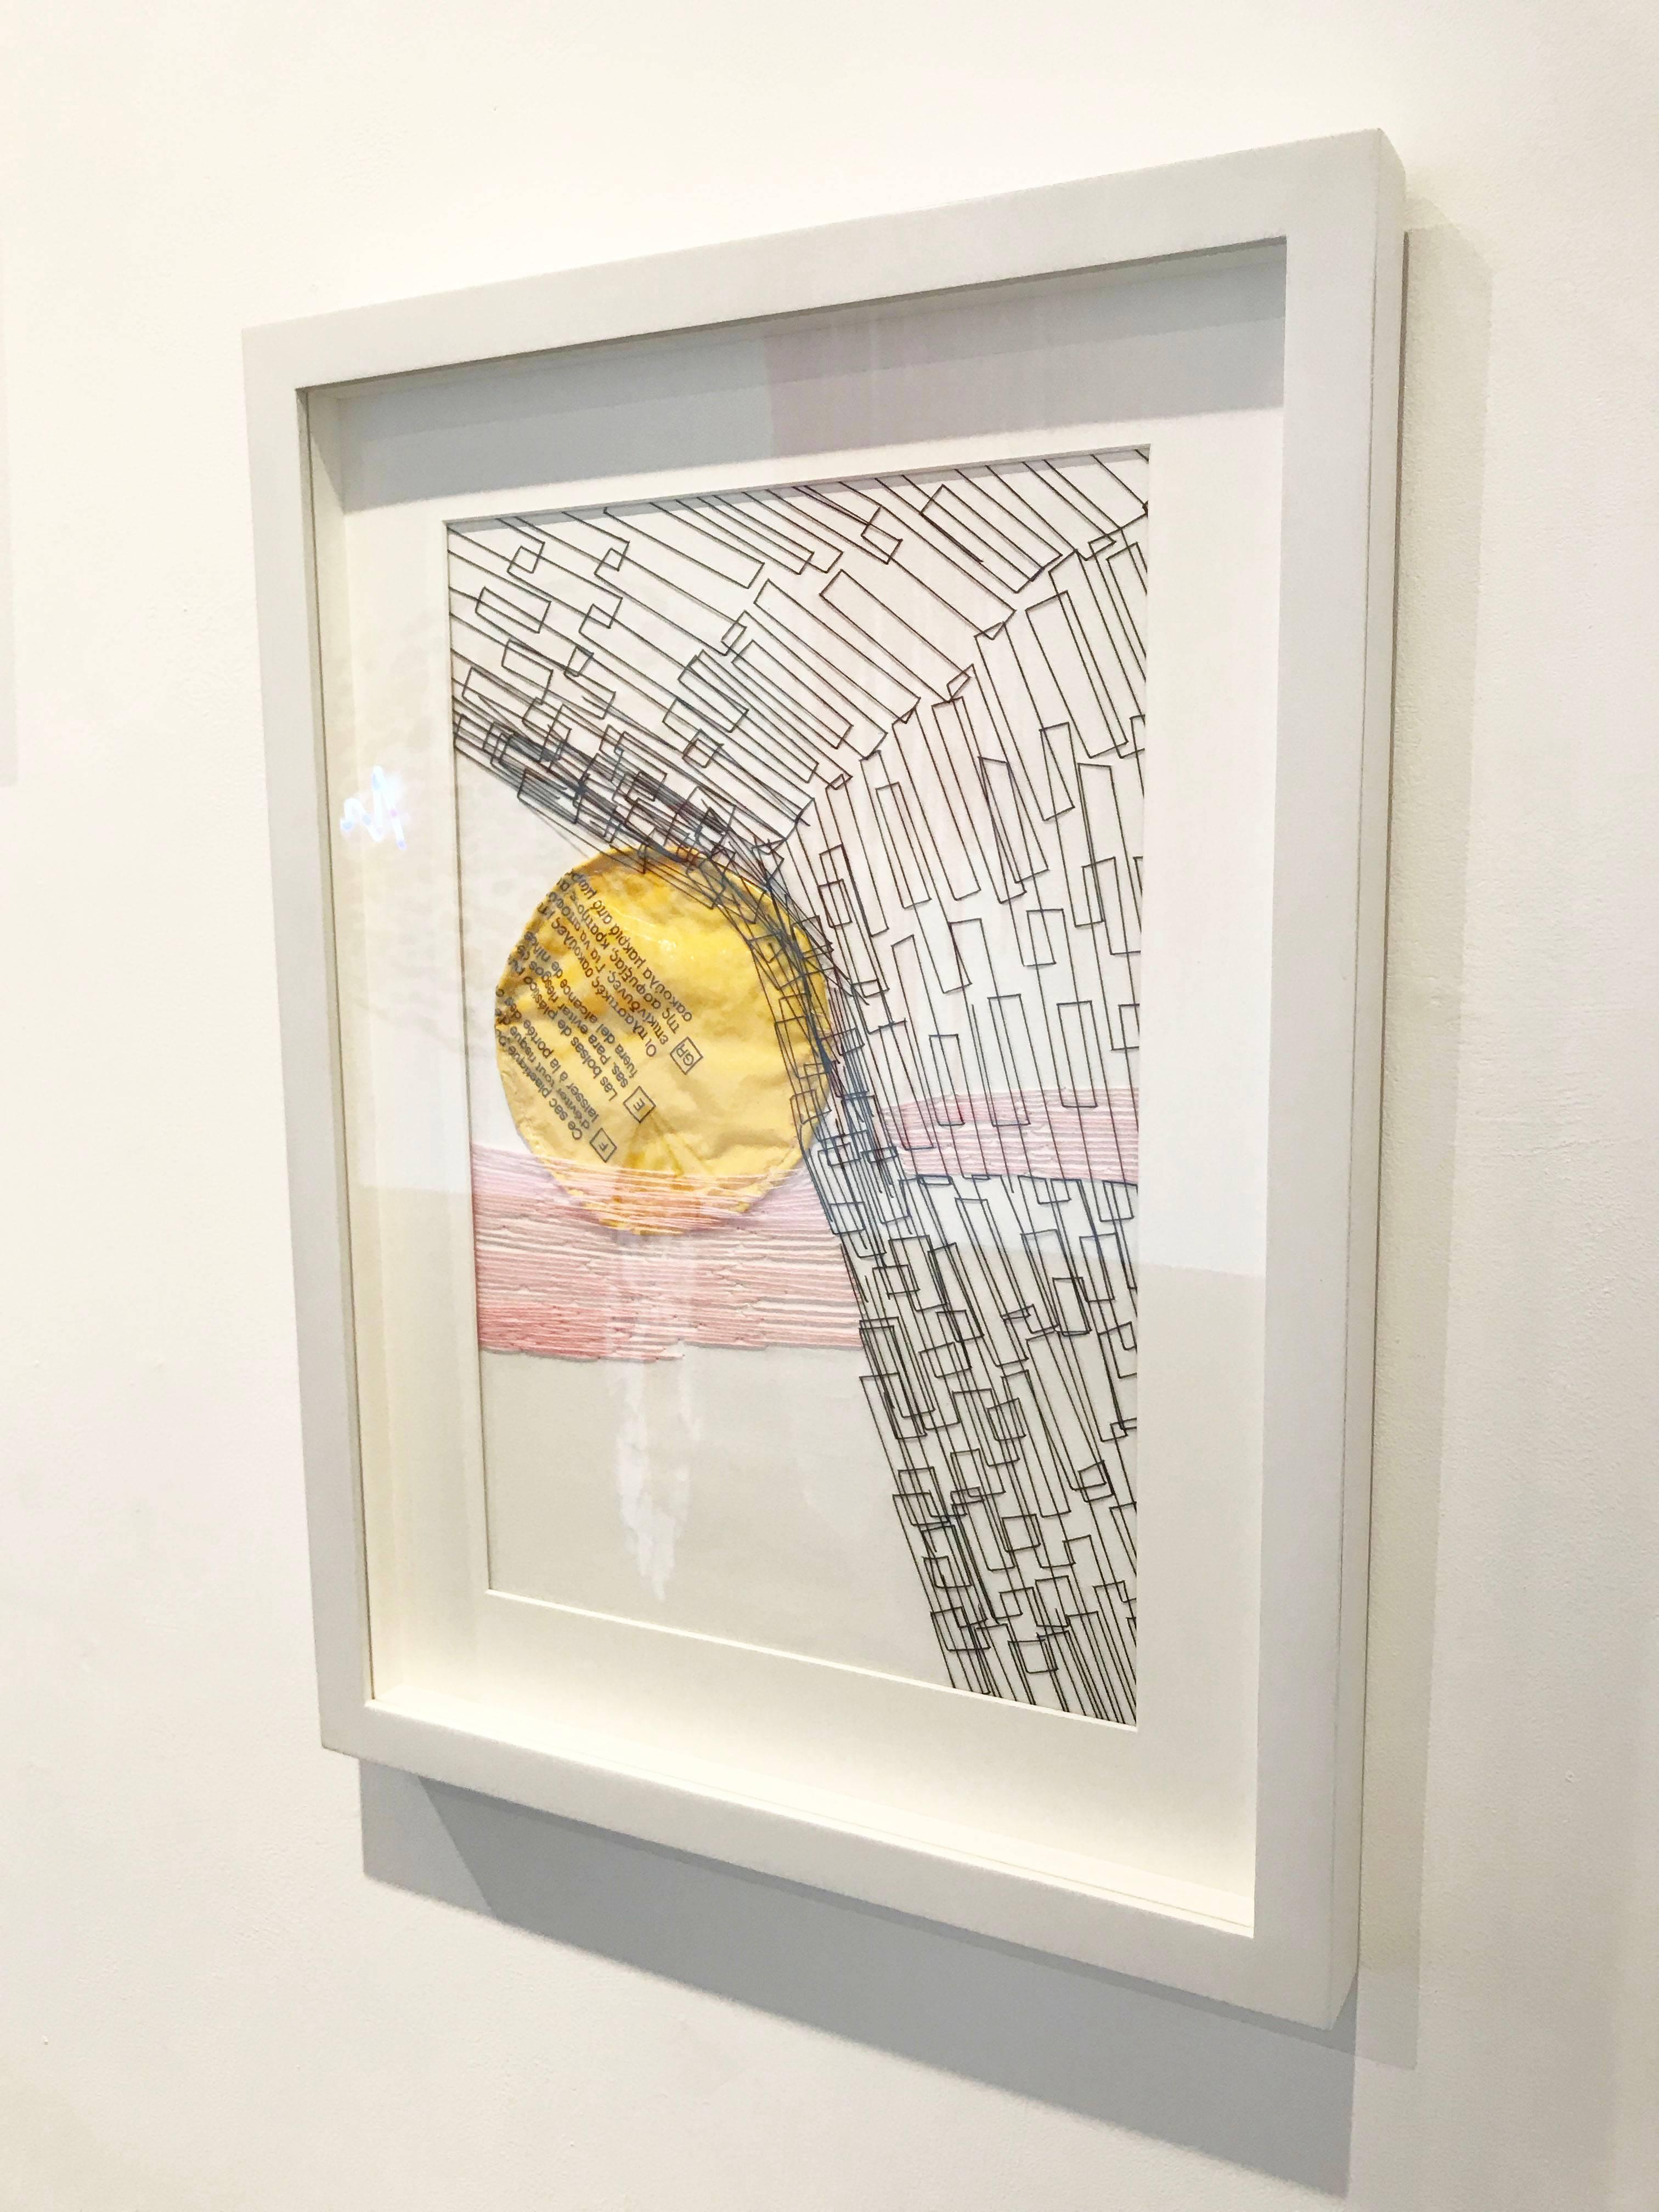 Untitled, 2015; 23 x 16.5” (framed), plastic, pipe cleaner, thread on canvas; $800

Caroline Lathan-Stiefel’s delicately-webbed “drawings-in-space” cover, divide, encircle, and fill
spaces. Often large in scale, they activate opportunities for